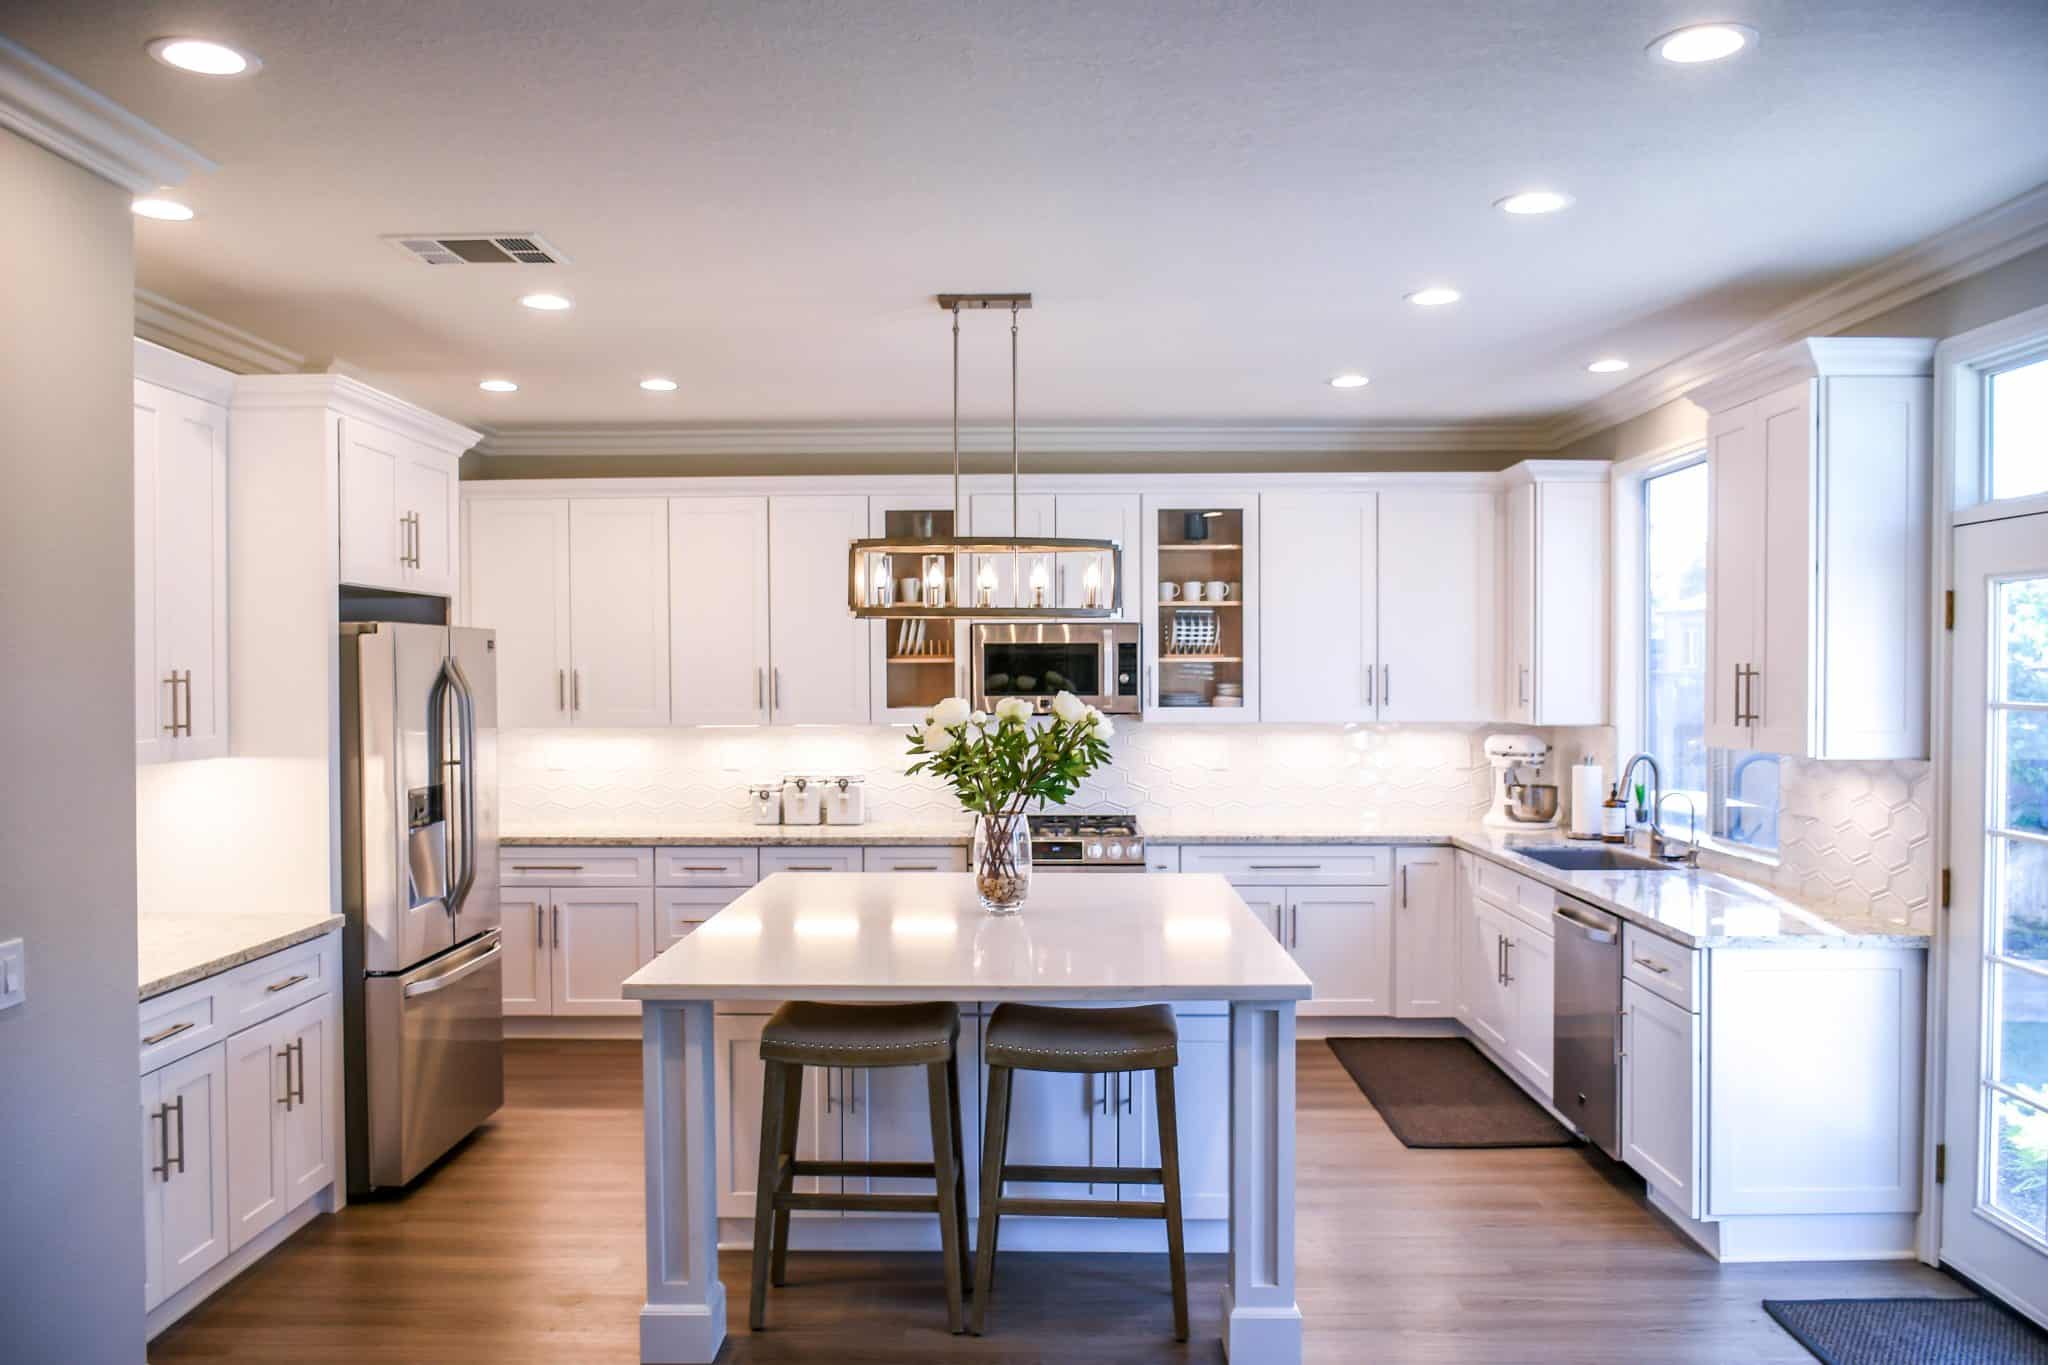 Bright white kitchen cabinets give this kitchen a bright, open, and modern look.